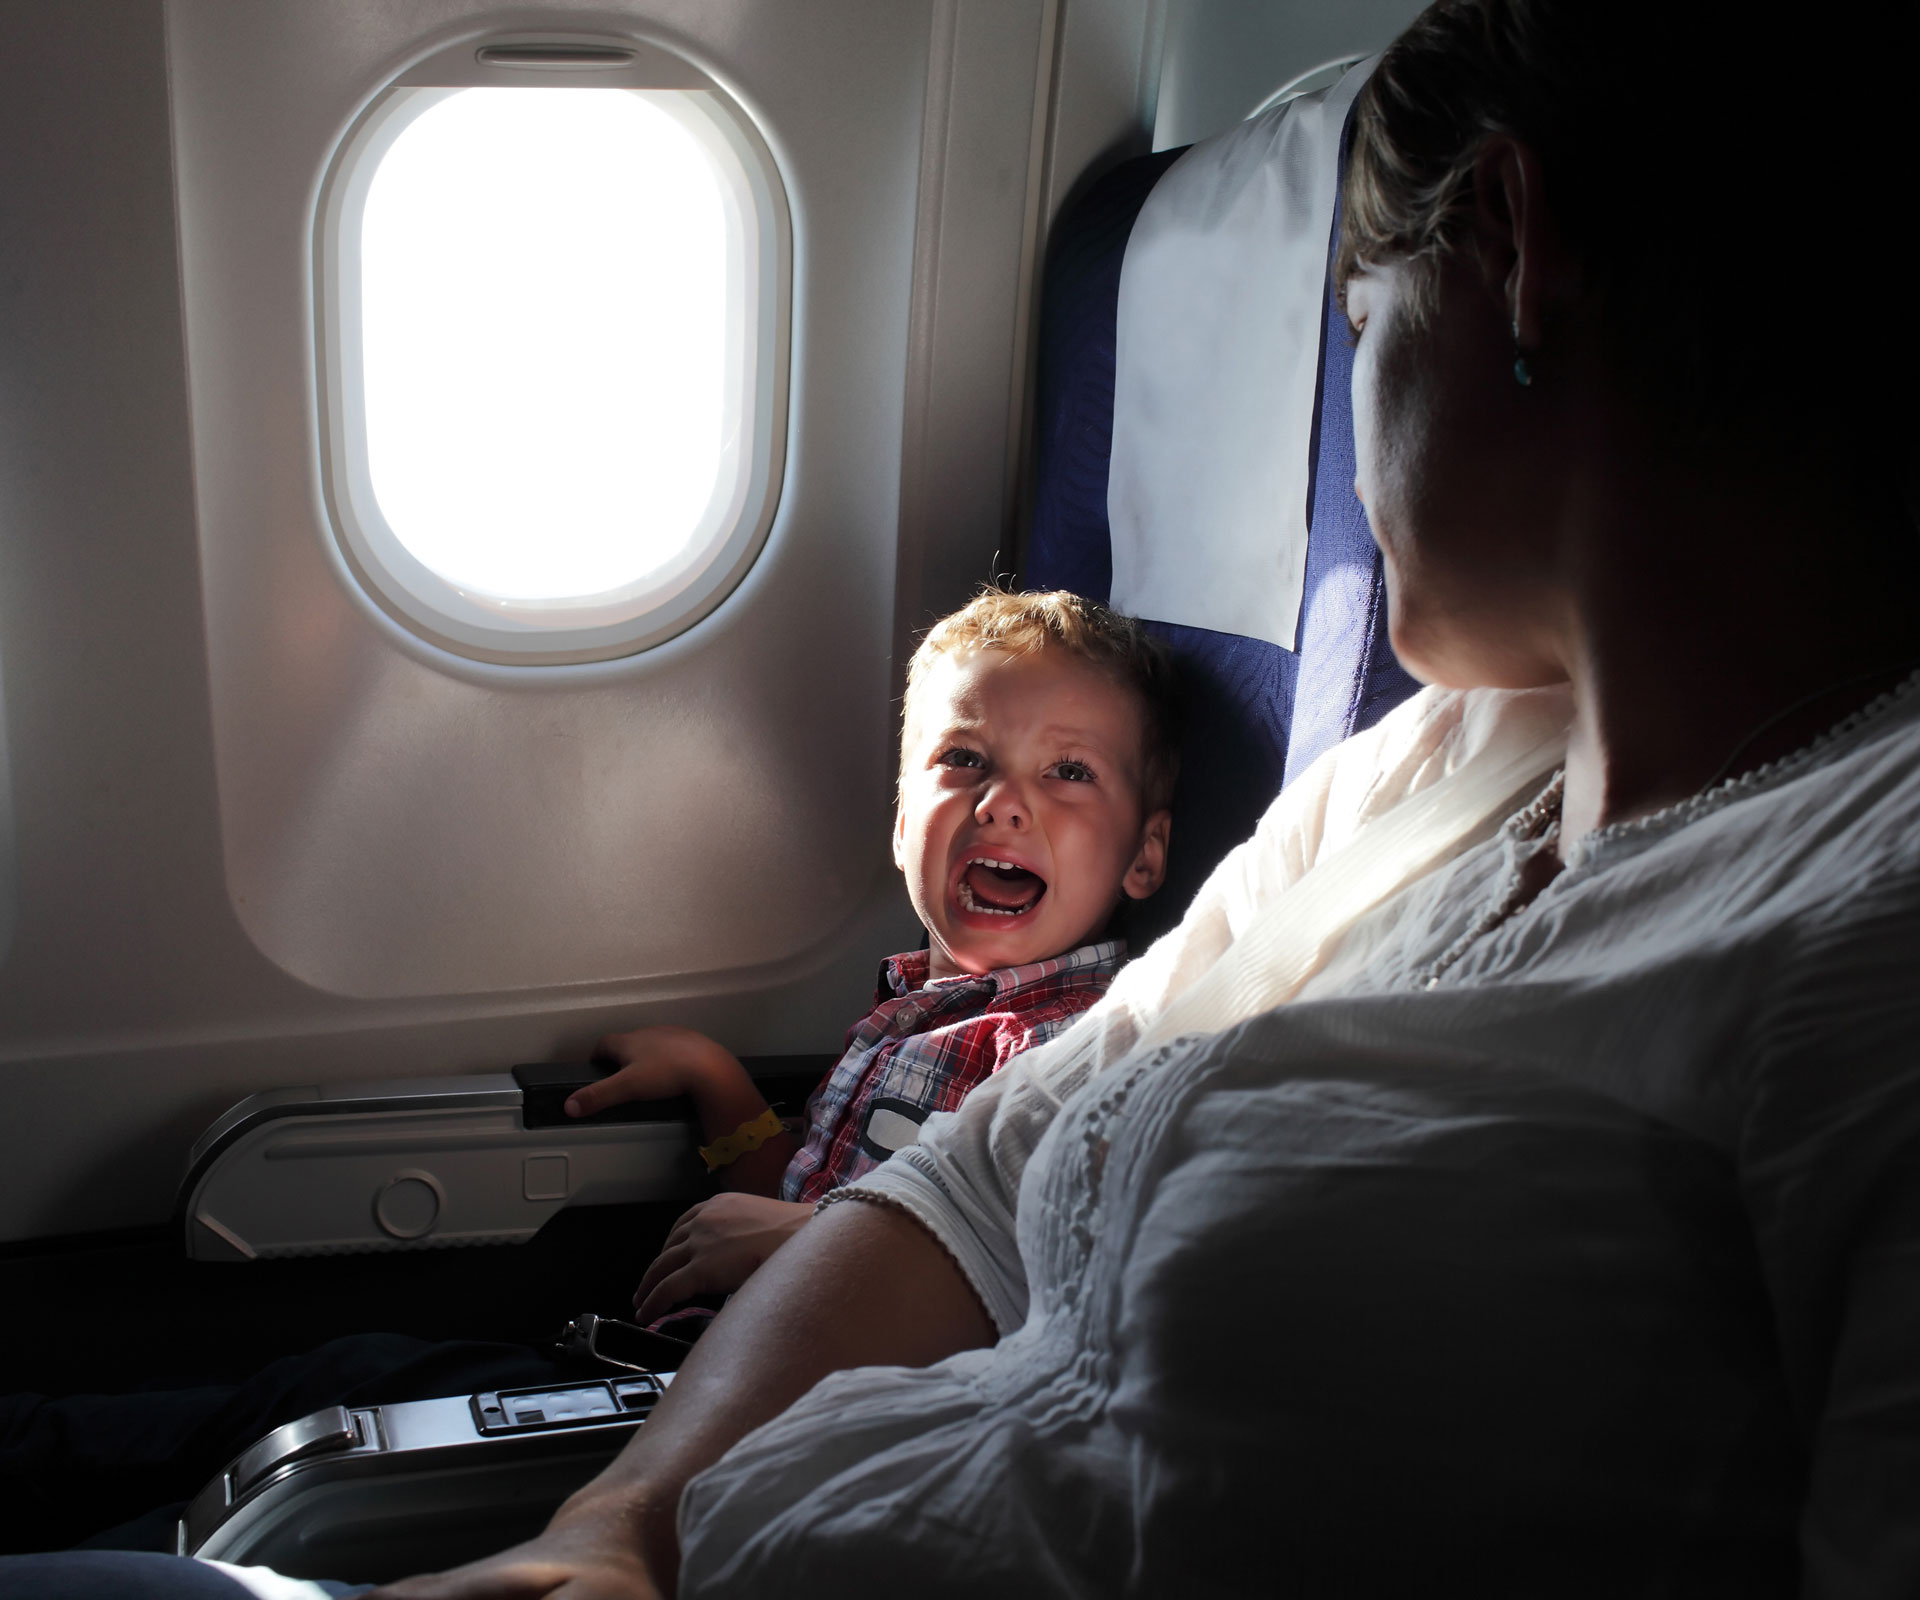 Should all planes have kid-free zones?